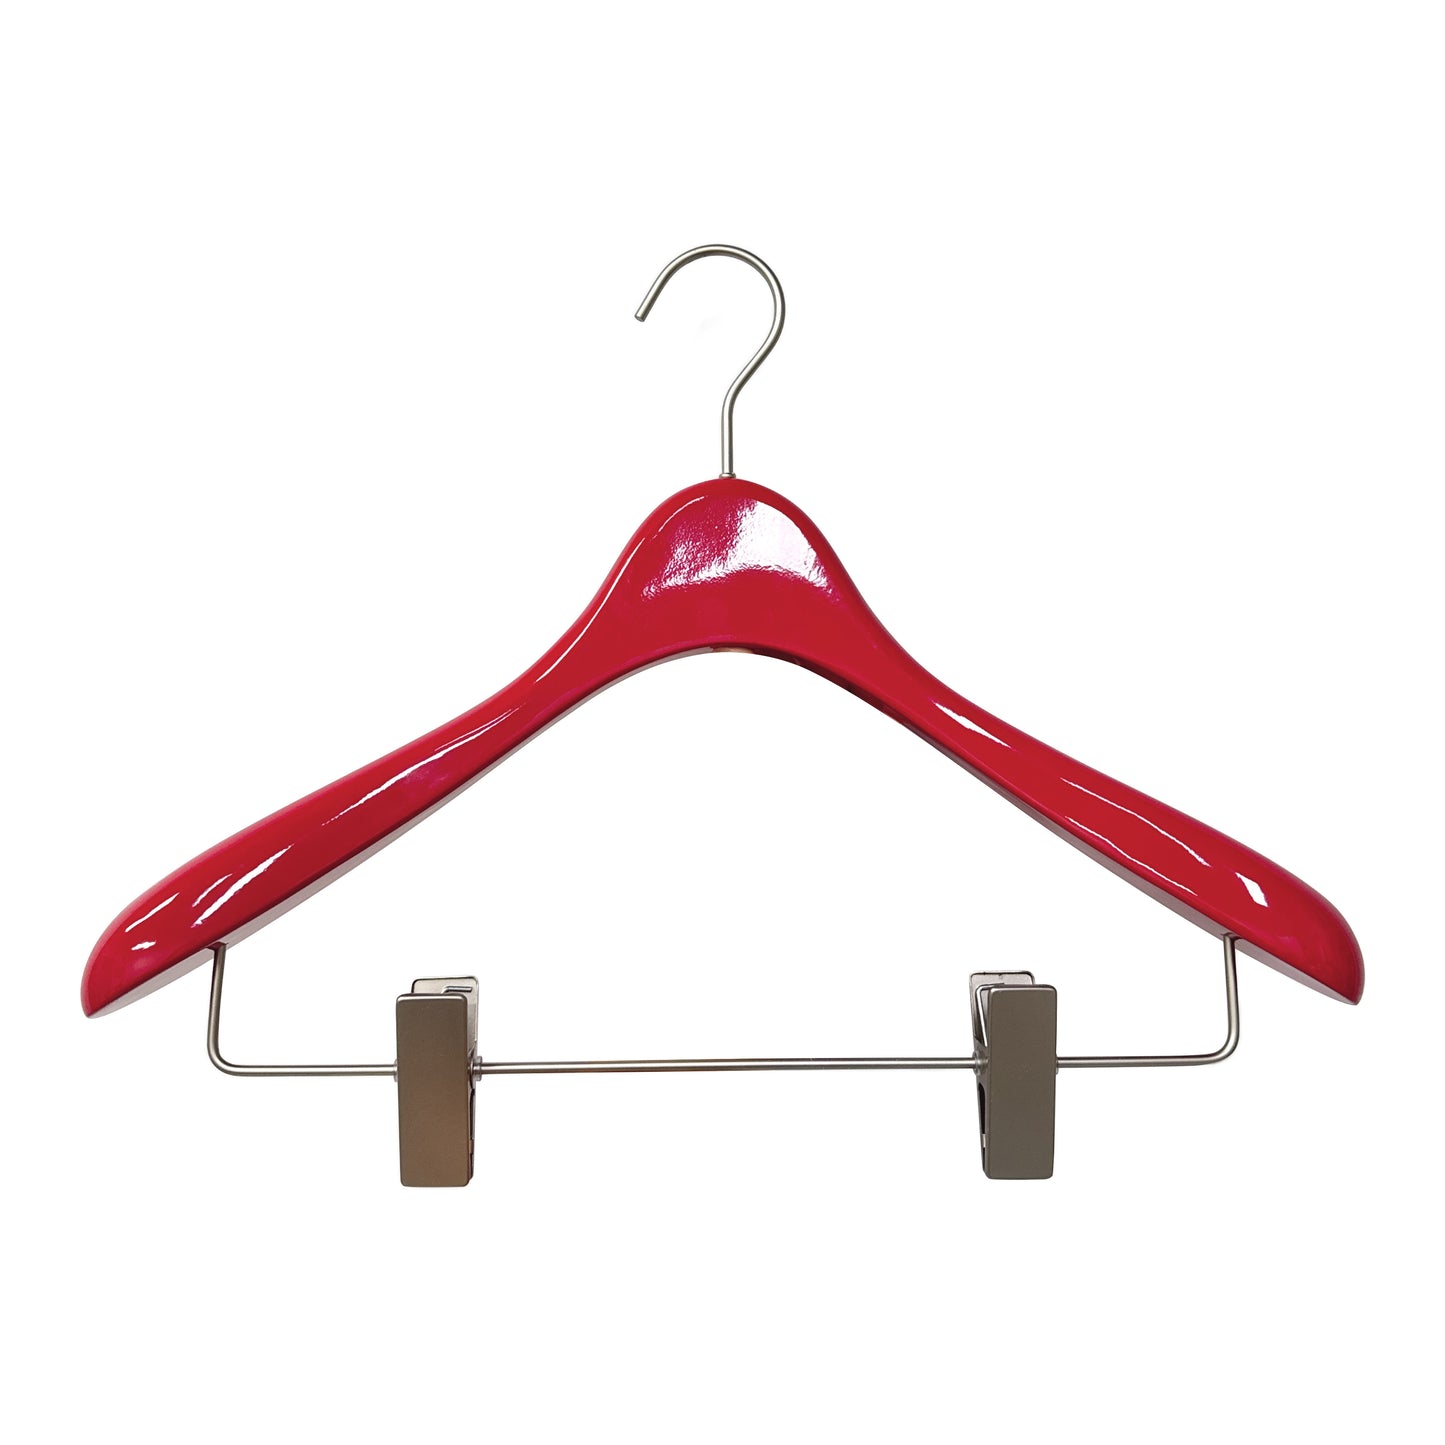 Jelimate Nordic Modern Hotel Luxury Wooden Clothing Hanger,Clothing Store Glossy Red Wood Clip Hanger,Suit Pant Garment Display Adult Wooden Hangers